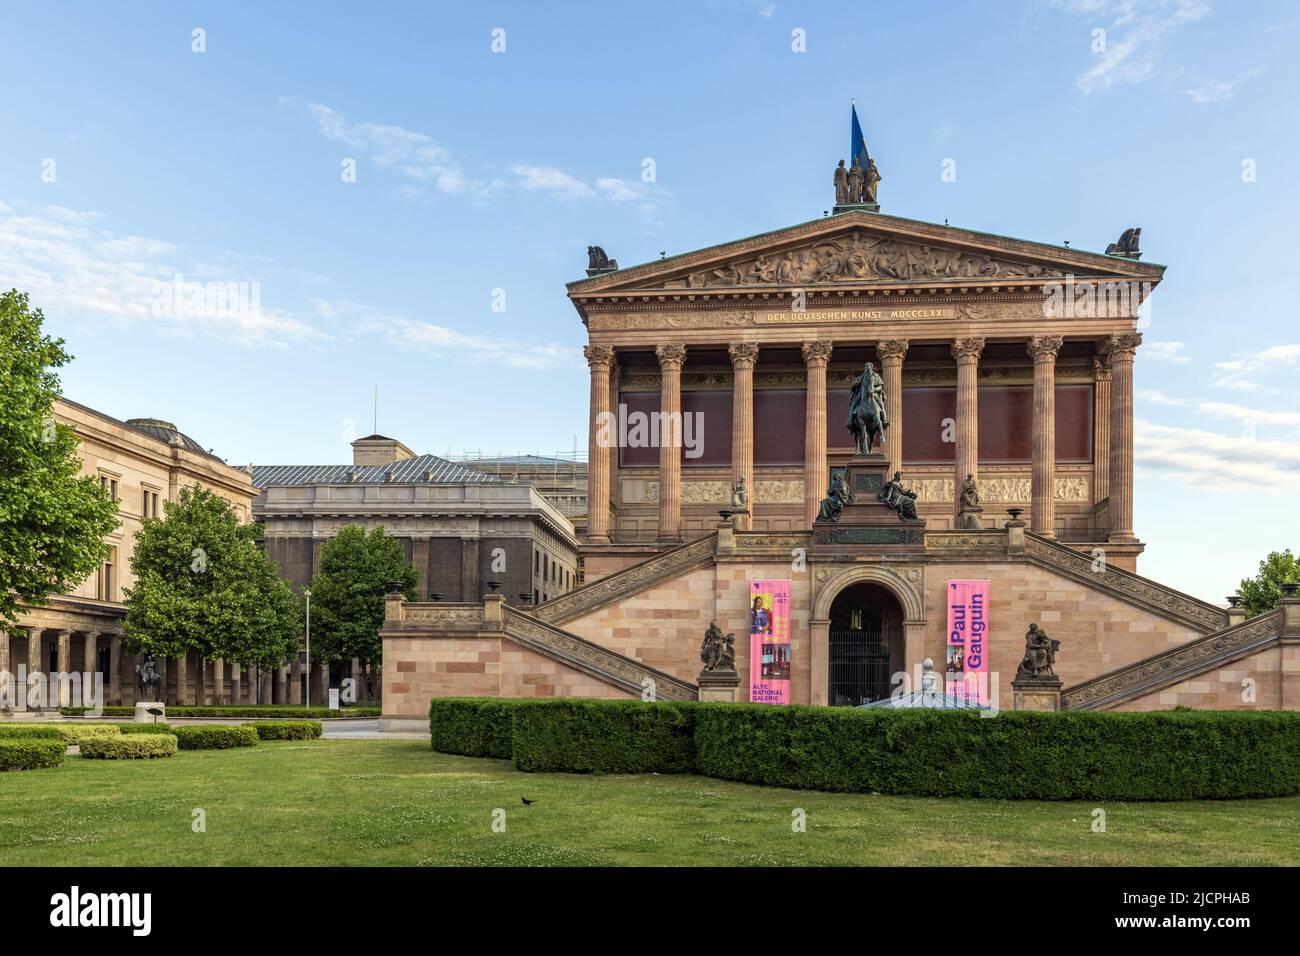 The Neo-classical facade of the Old National Gallery (Alte Nationalgalerie) in Berlin, Germany. Stock Photo